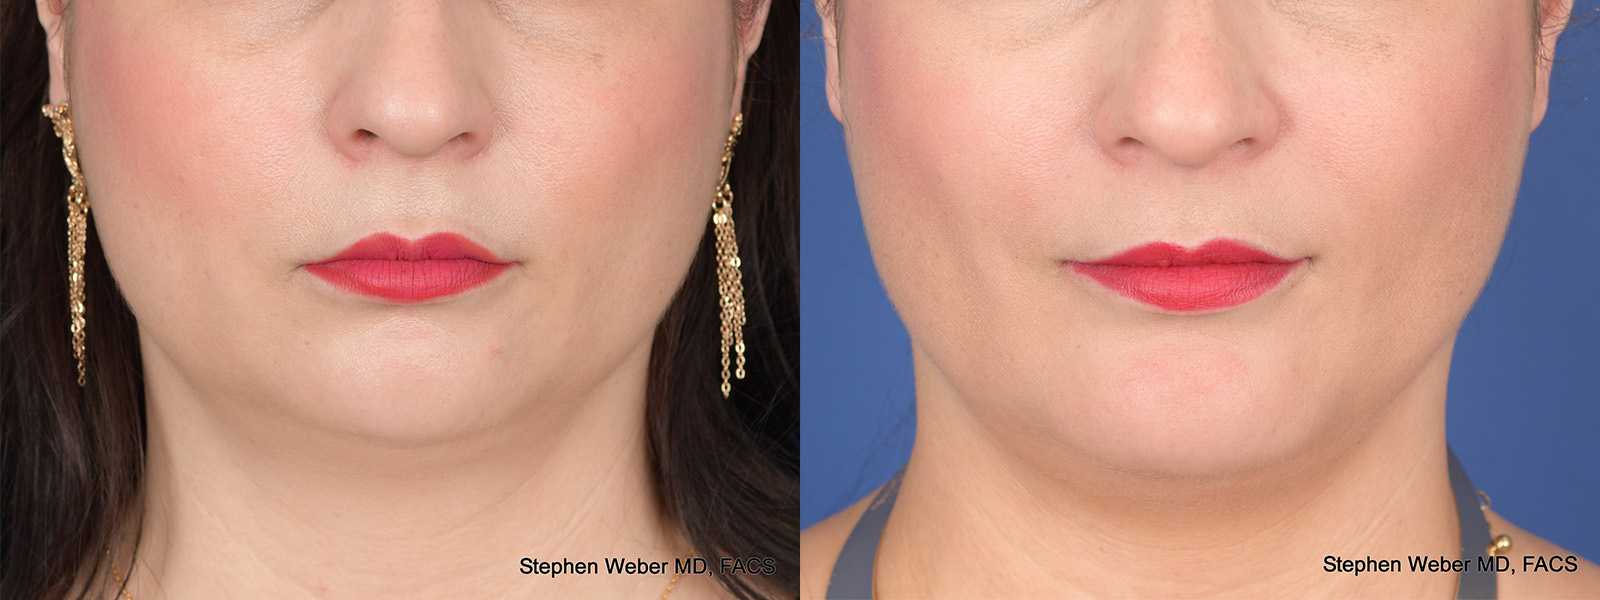 Before and After Buccal Fat Removal in Denver 2